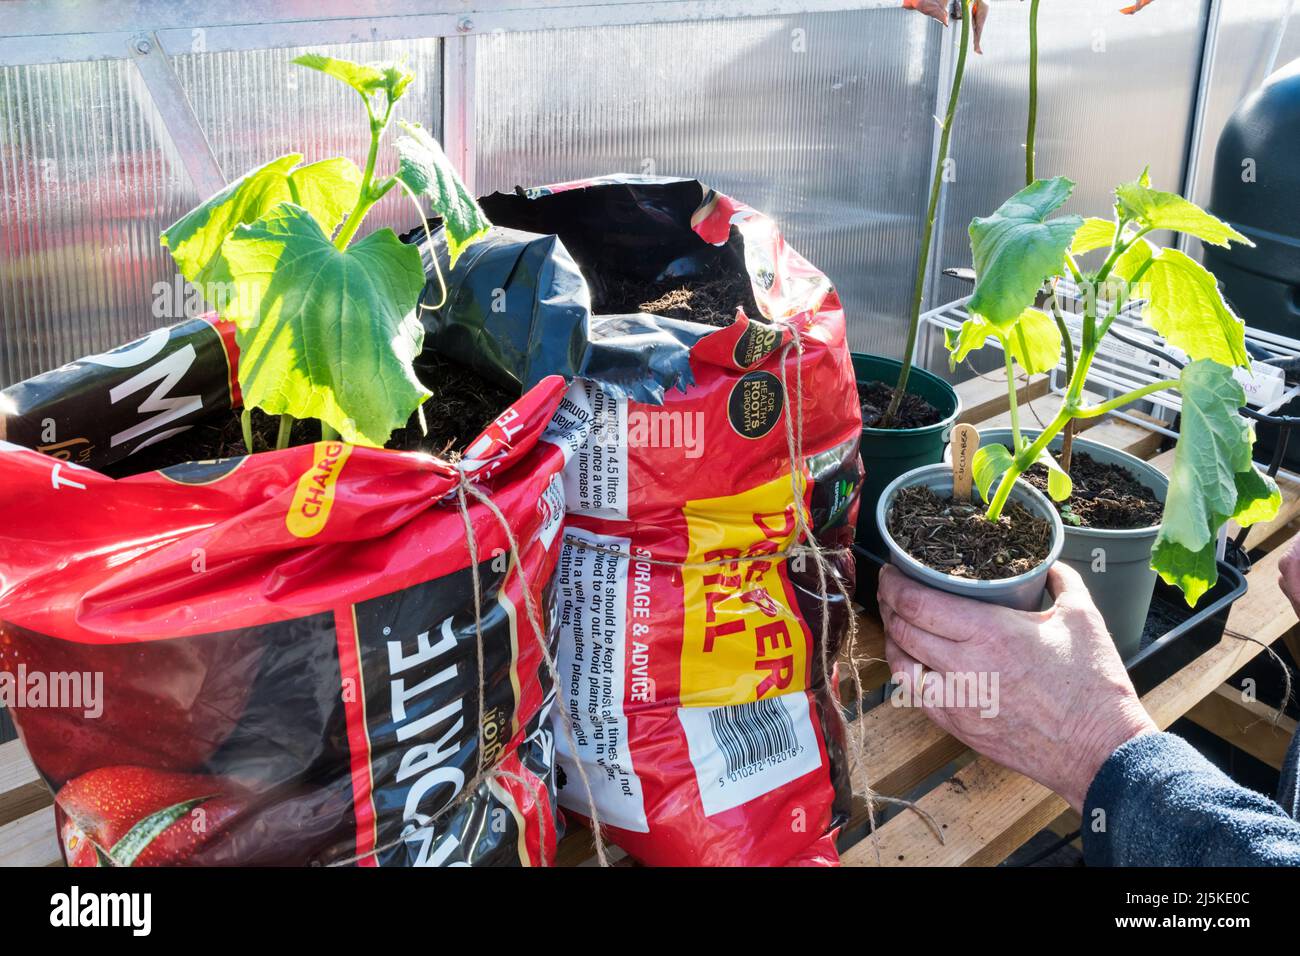 Plastic Grow Bags, For Growing Plants